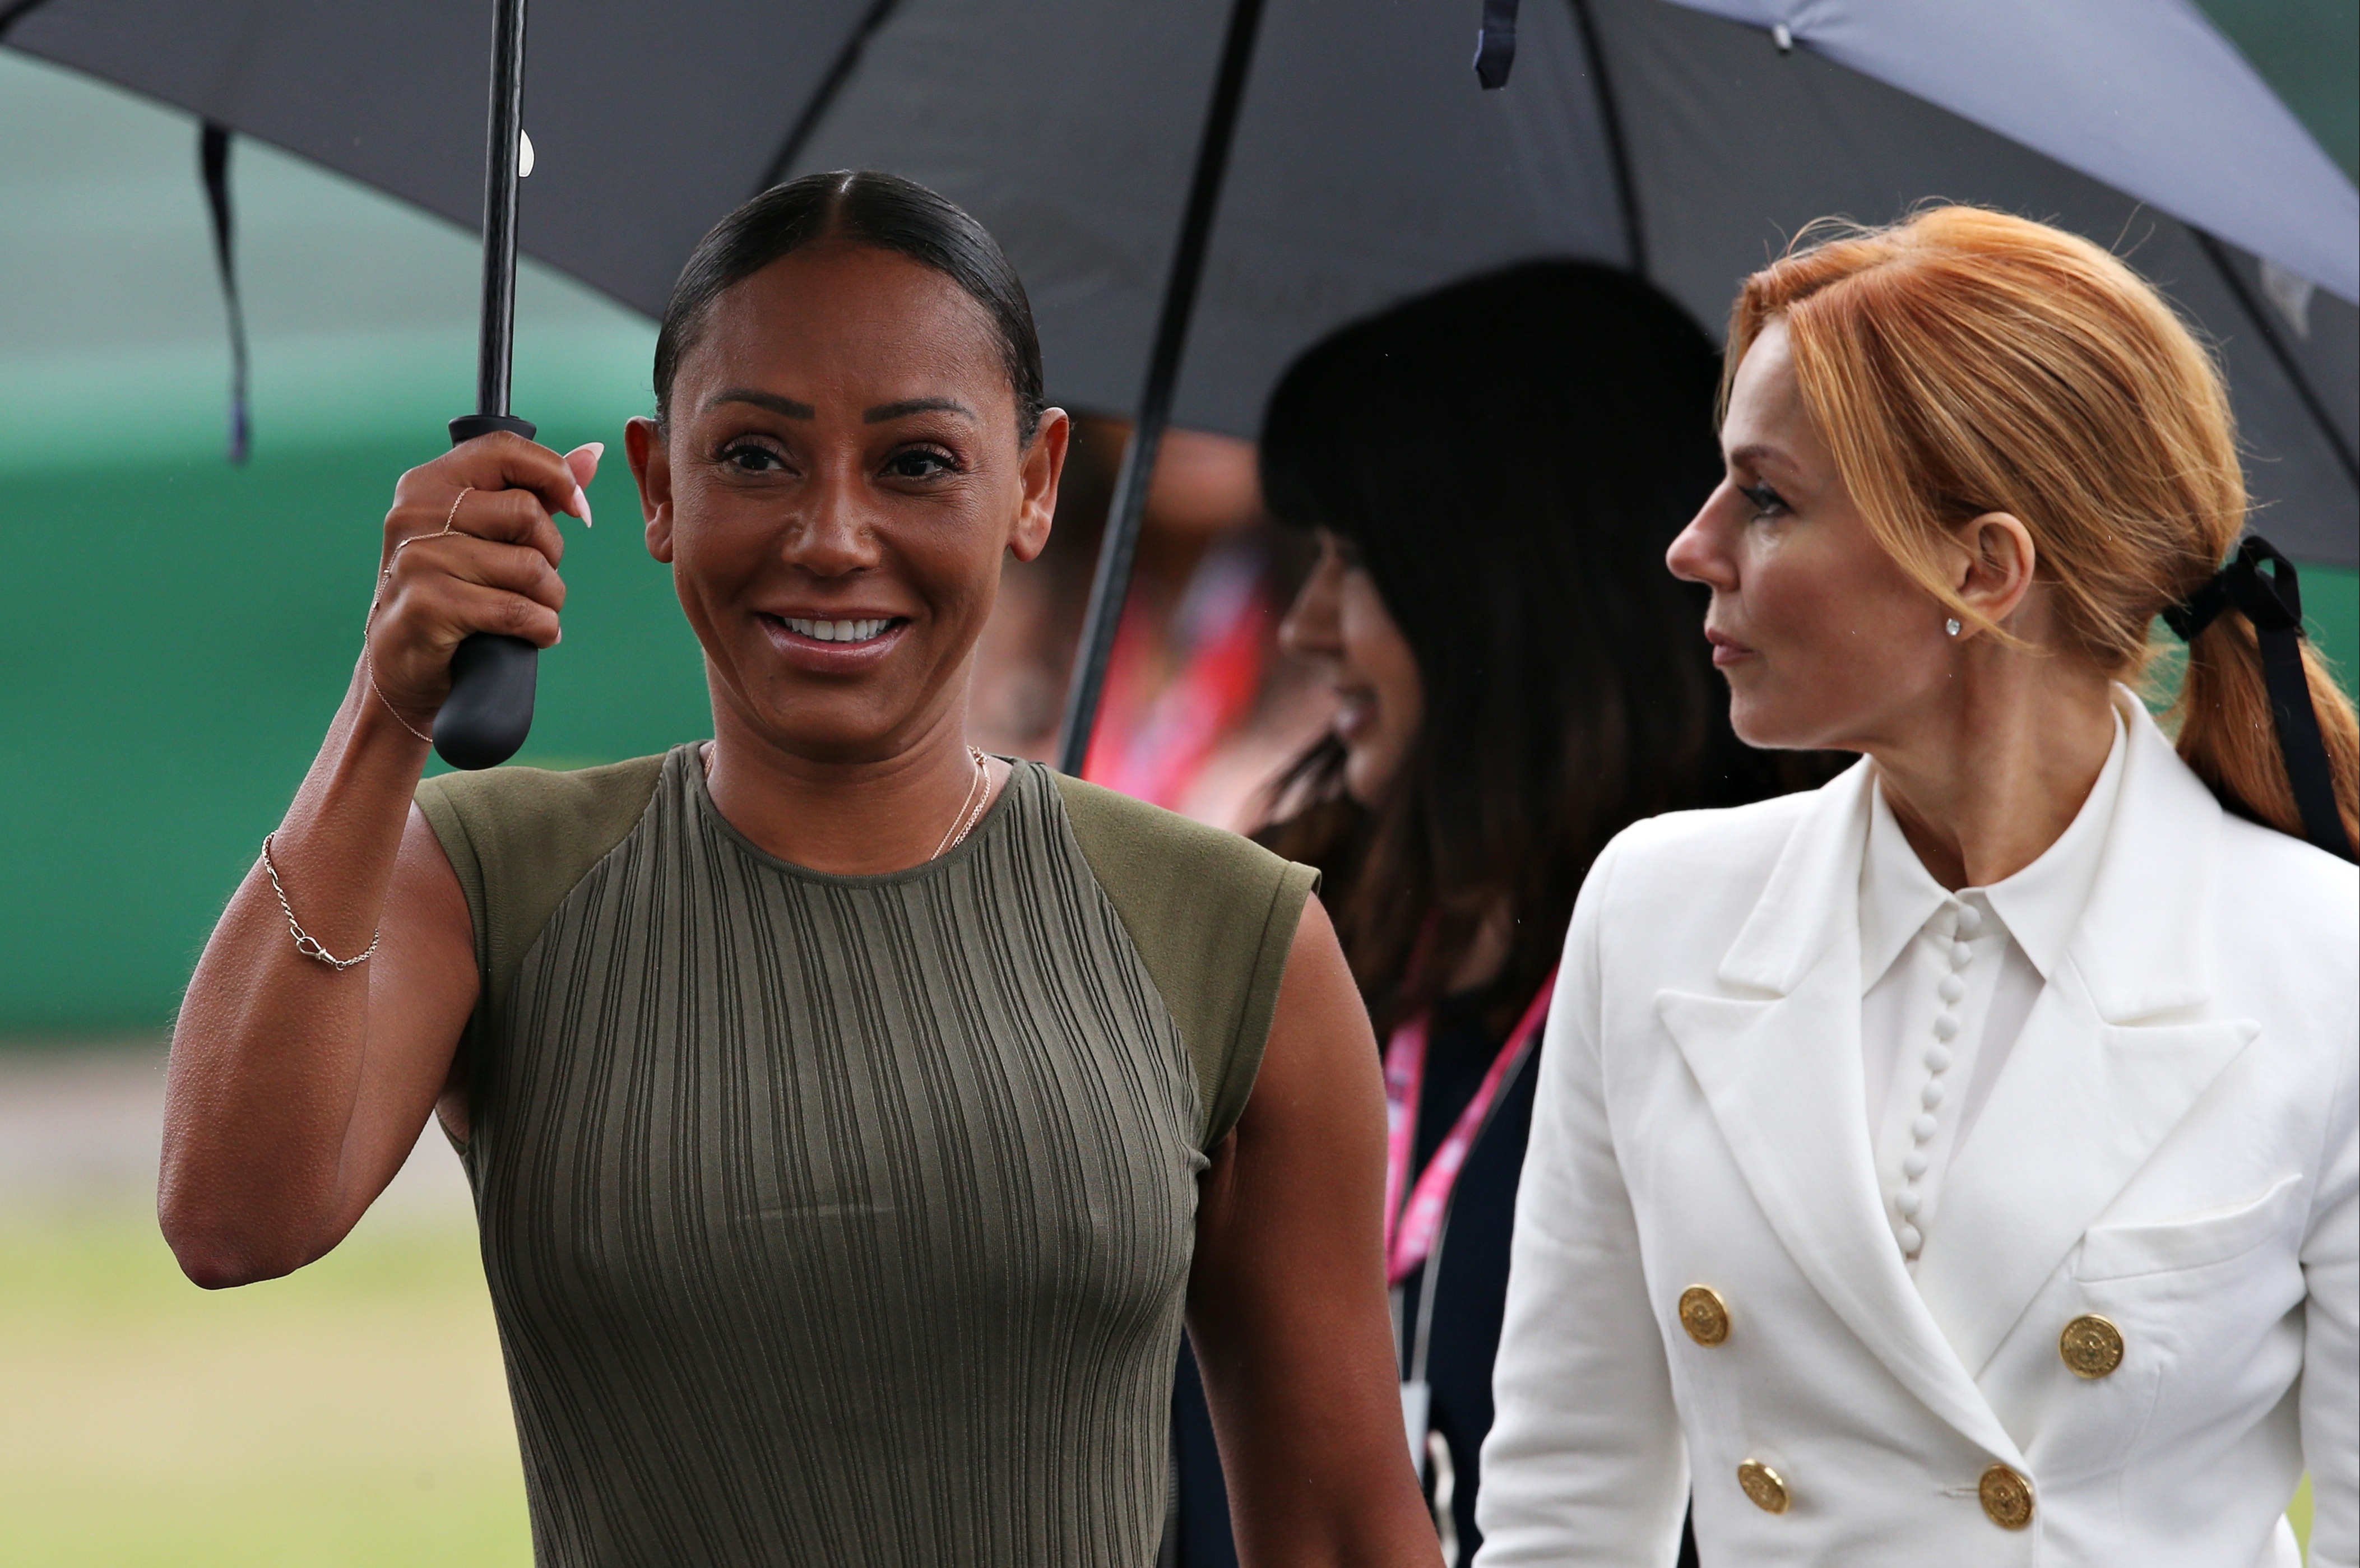 Mel B and Geri at a Grand Prix at Silverstone in 2019